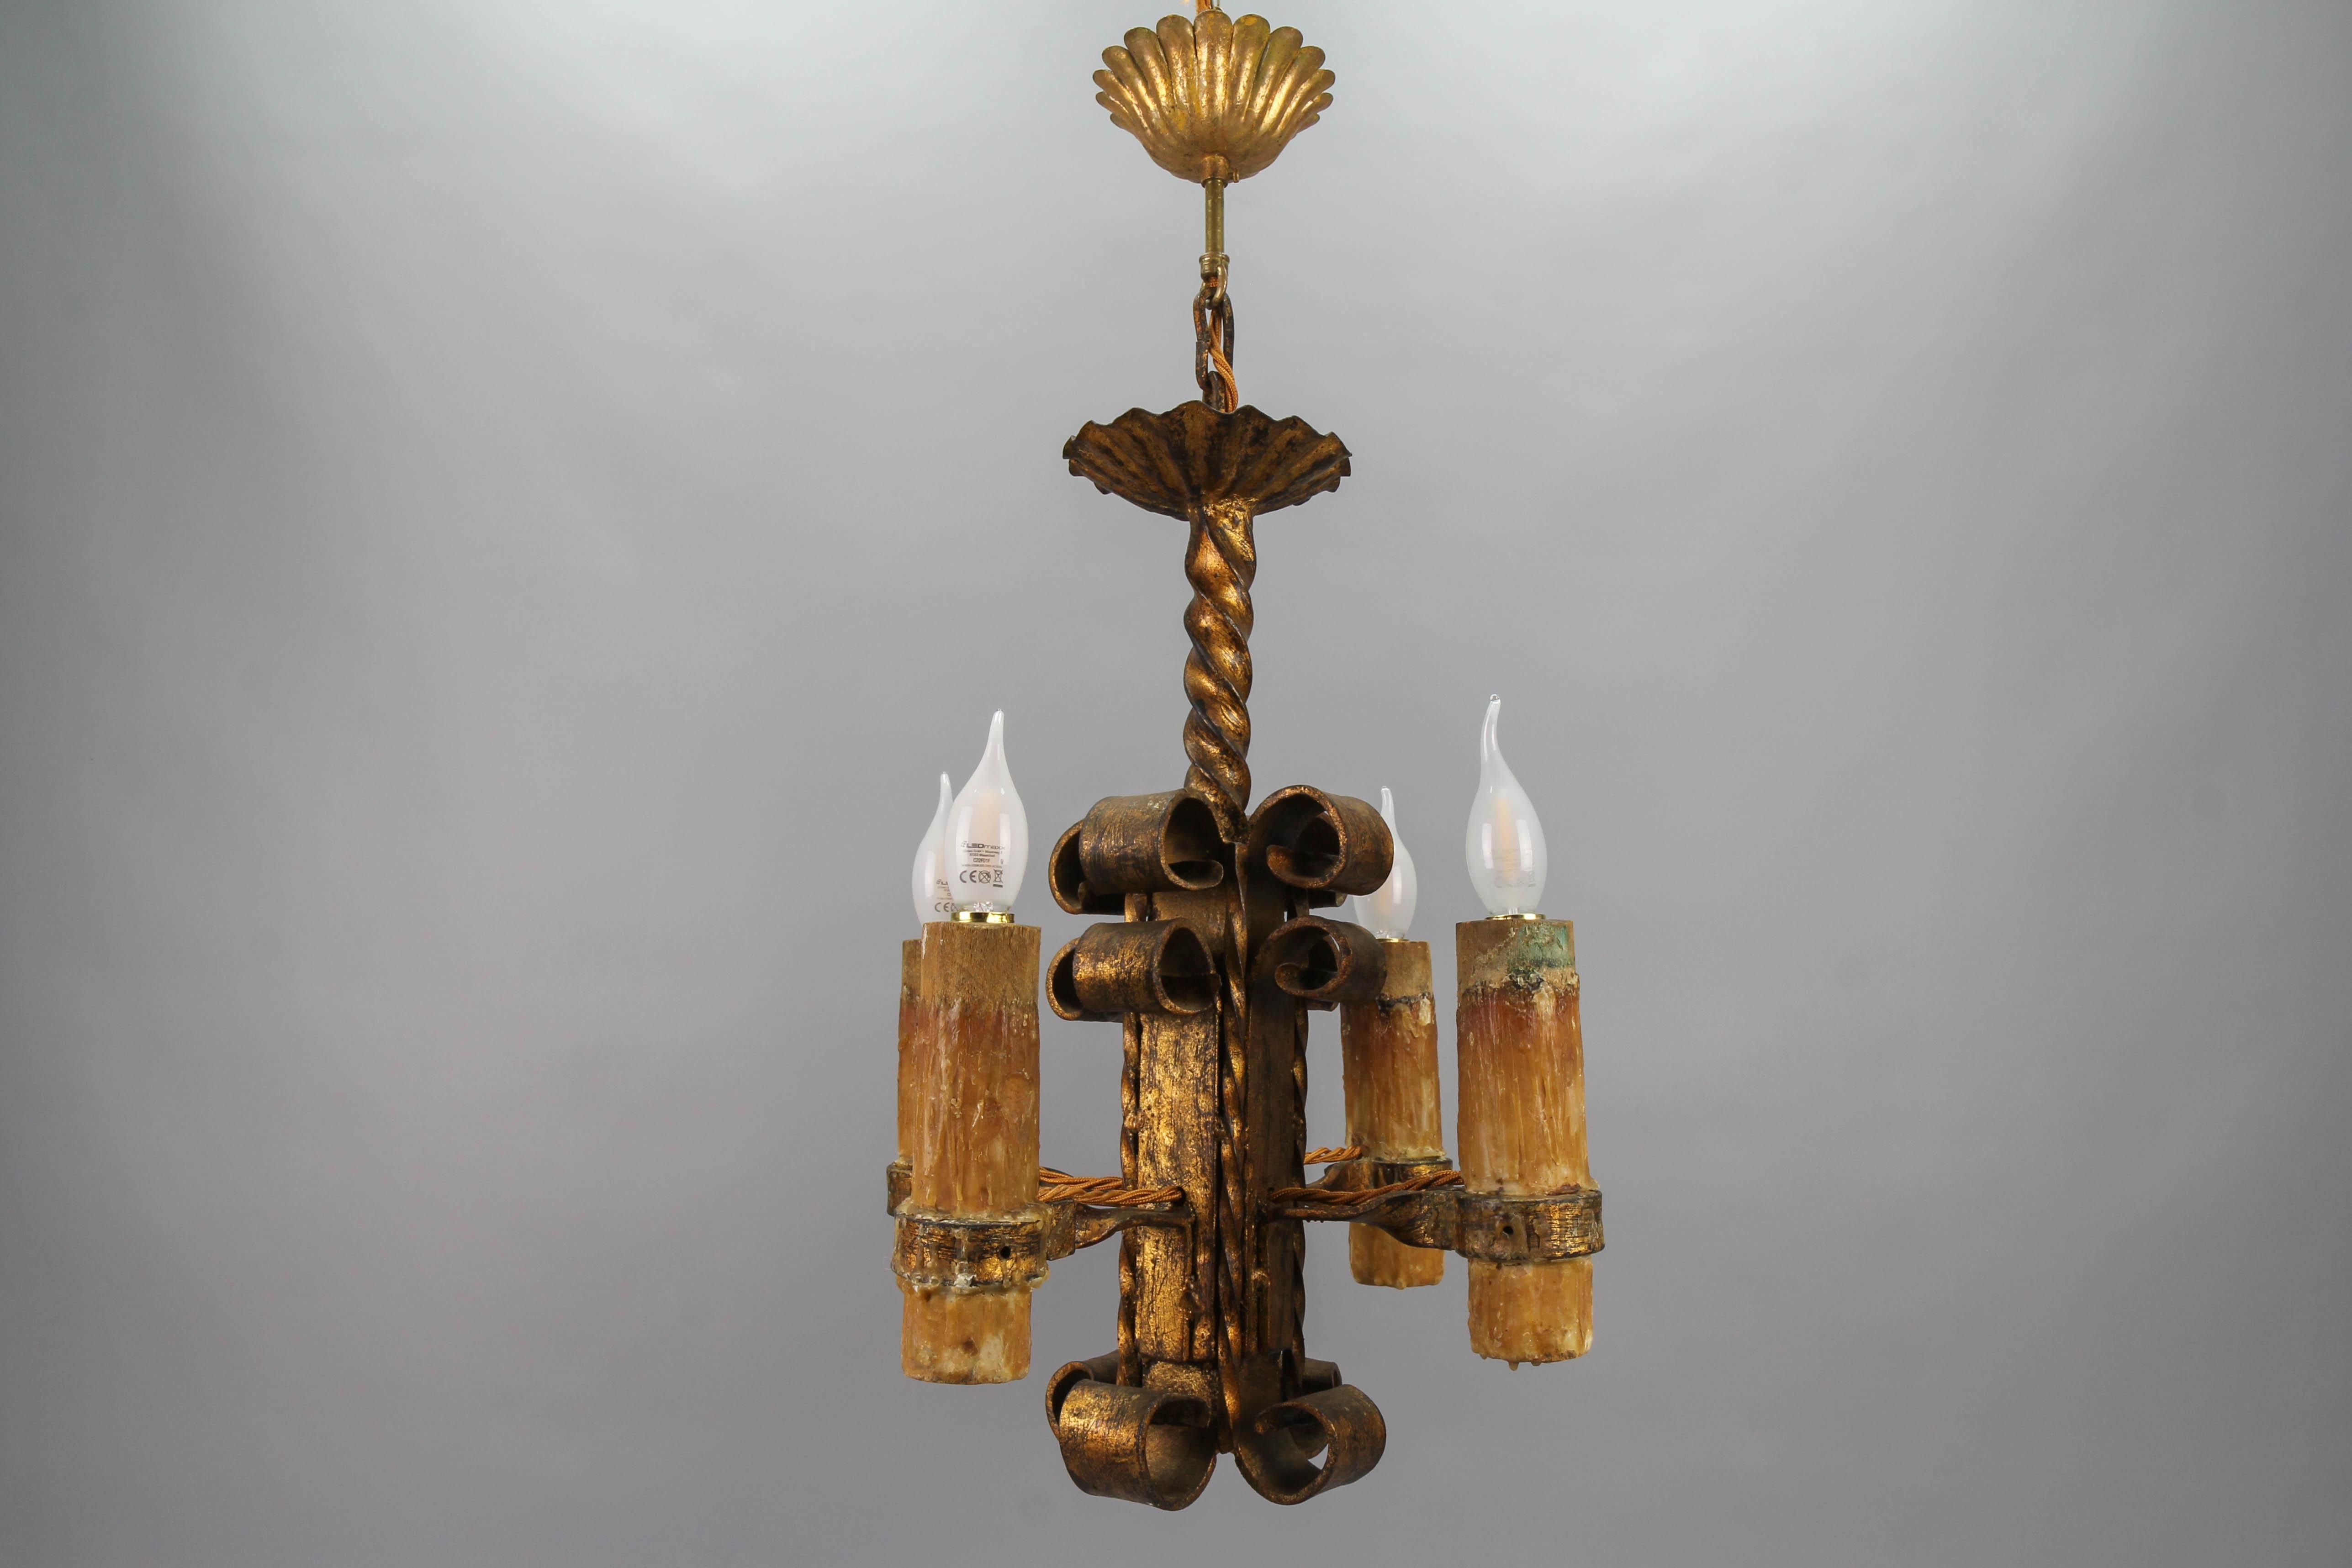 Late 19th century gilt wrought iron medieval style four-light chandelier
An impressive and heavy medieval-style castle design gilt wrought iron four-light chandelier from the late 19th century. The large decorative wooden candle sleeves are covered